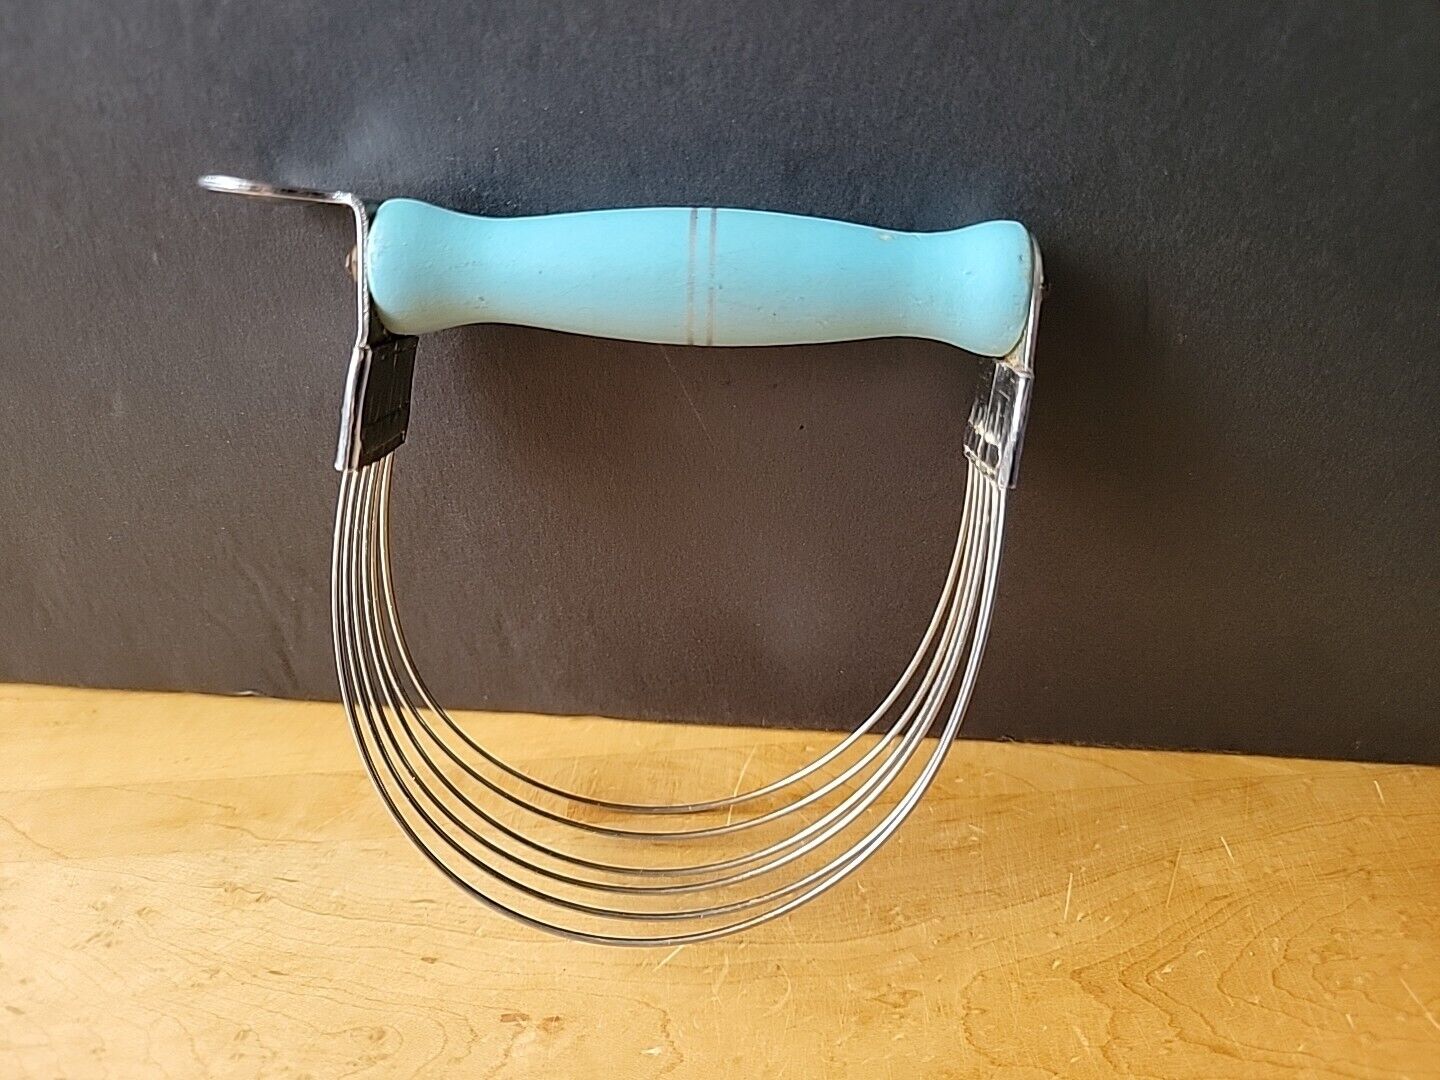 Vintage NUTBROWN Wire Pastry Blender - Robin Egg Blue - Excellent Condition